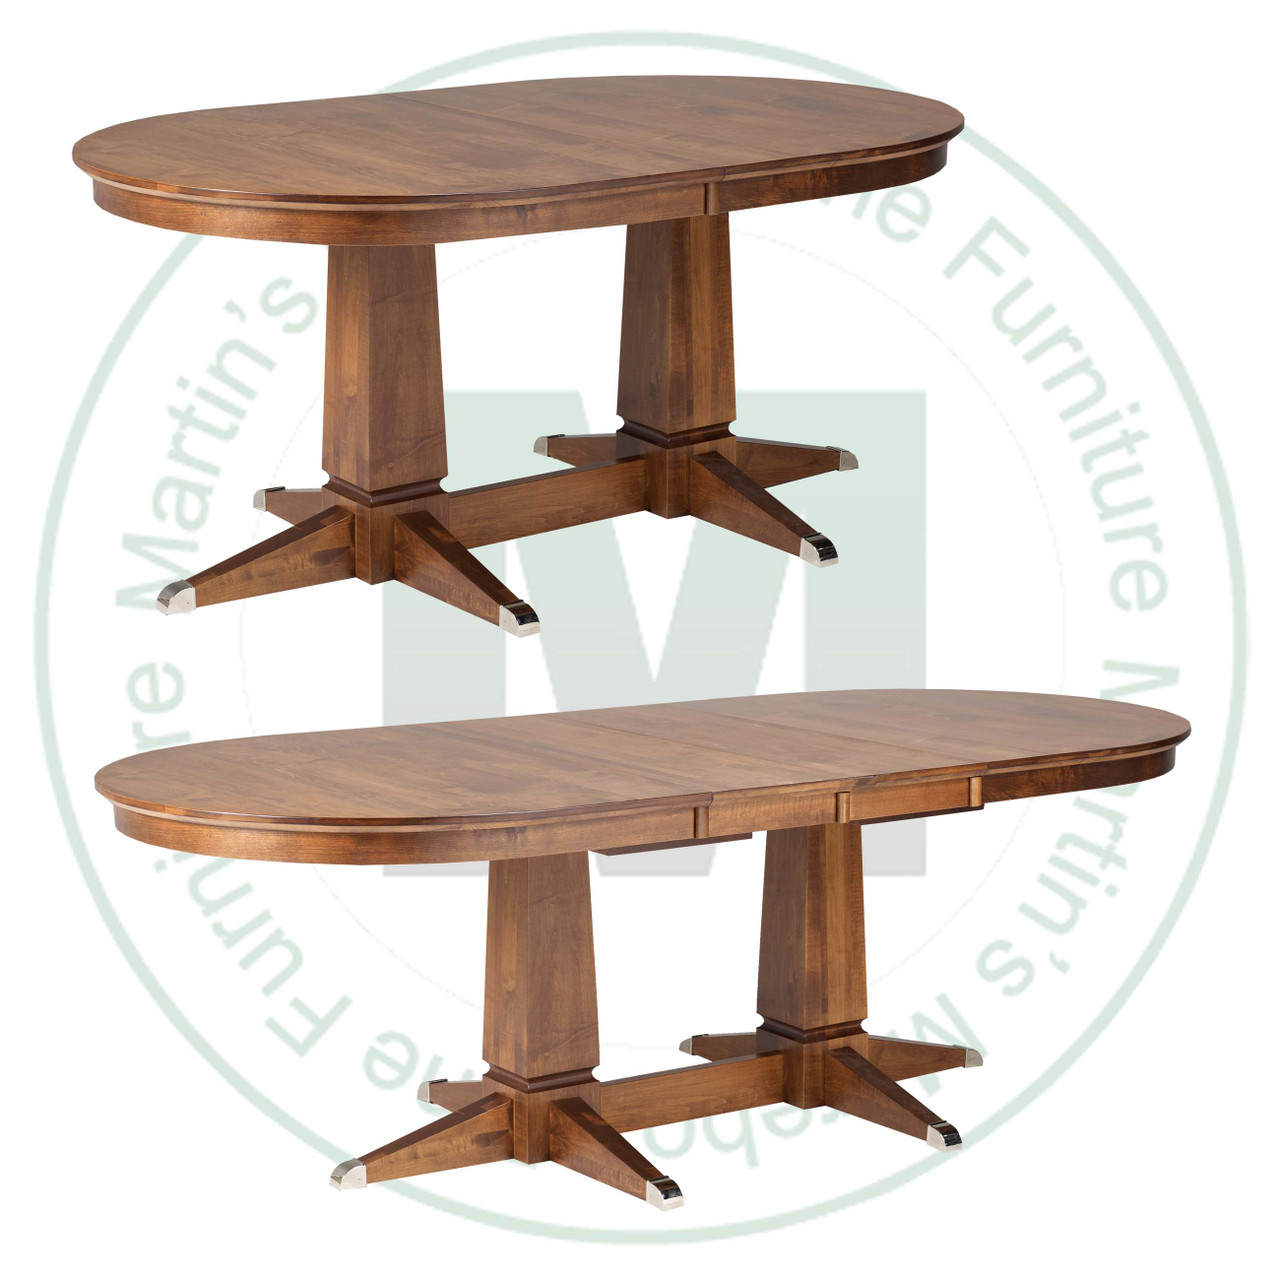 Maple Sweden Double Pedestal Table 42''D x 84''W x 30''H With 4 - 12'' Leaves